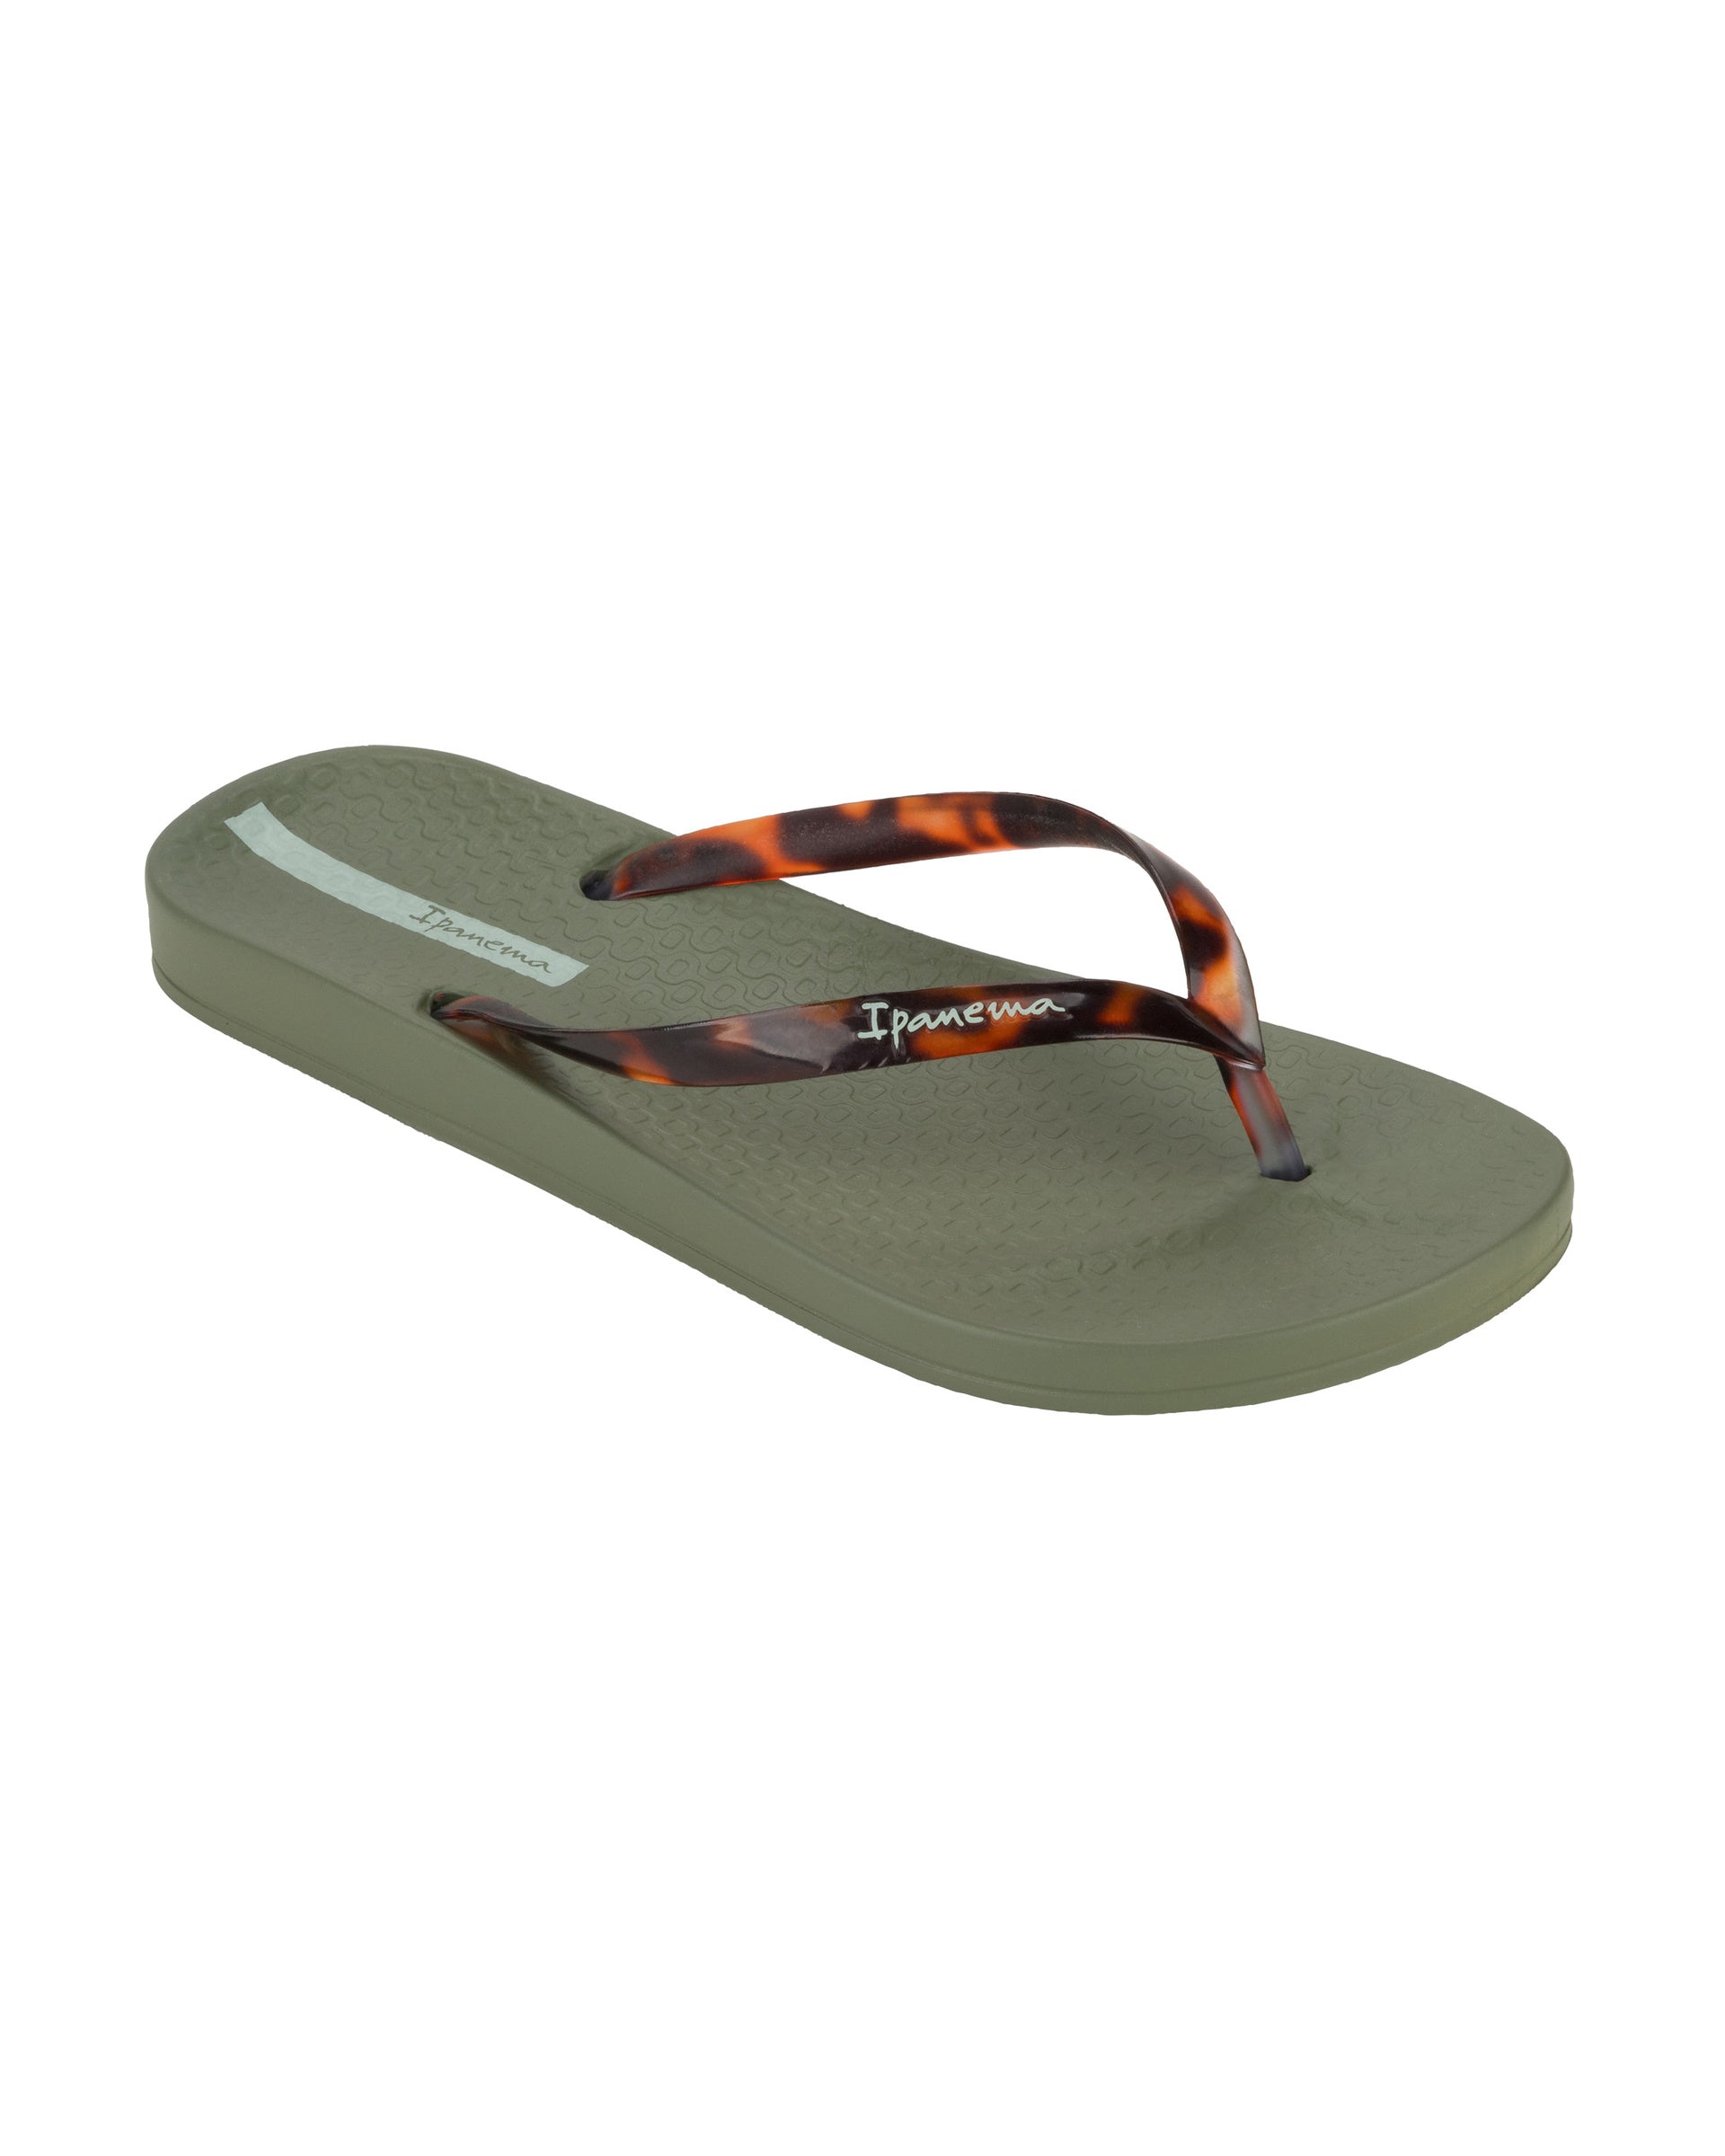 Angled view of a green Ipanema Ana Connect women's flip flop with brown tortoiseshell  color strap.